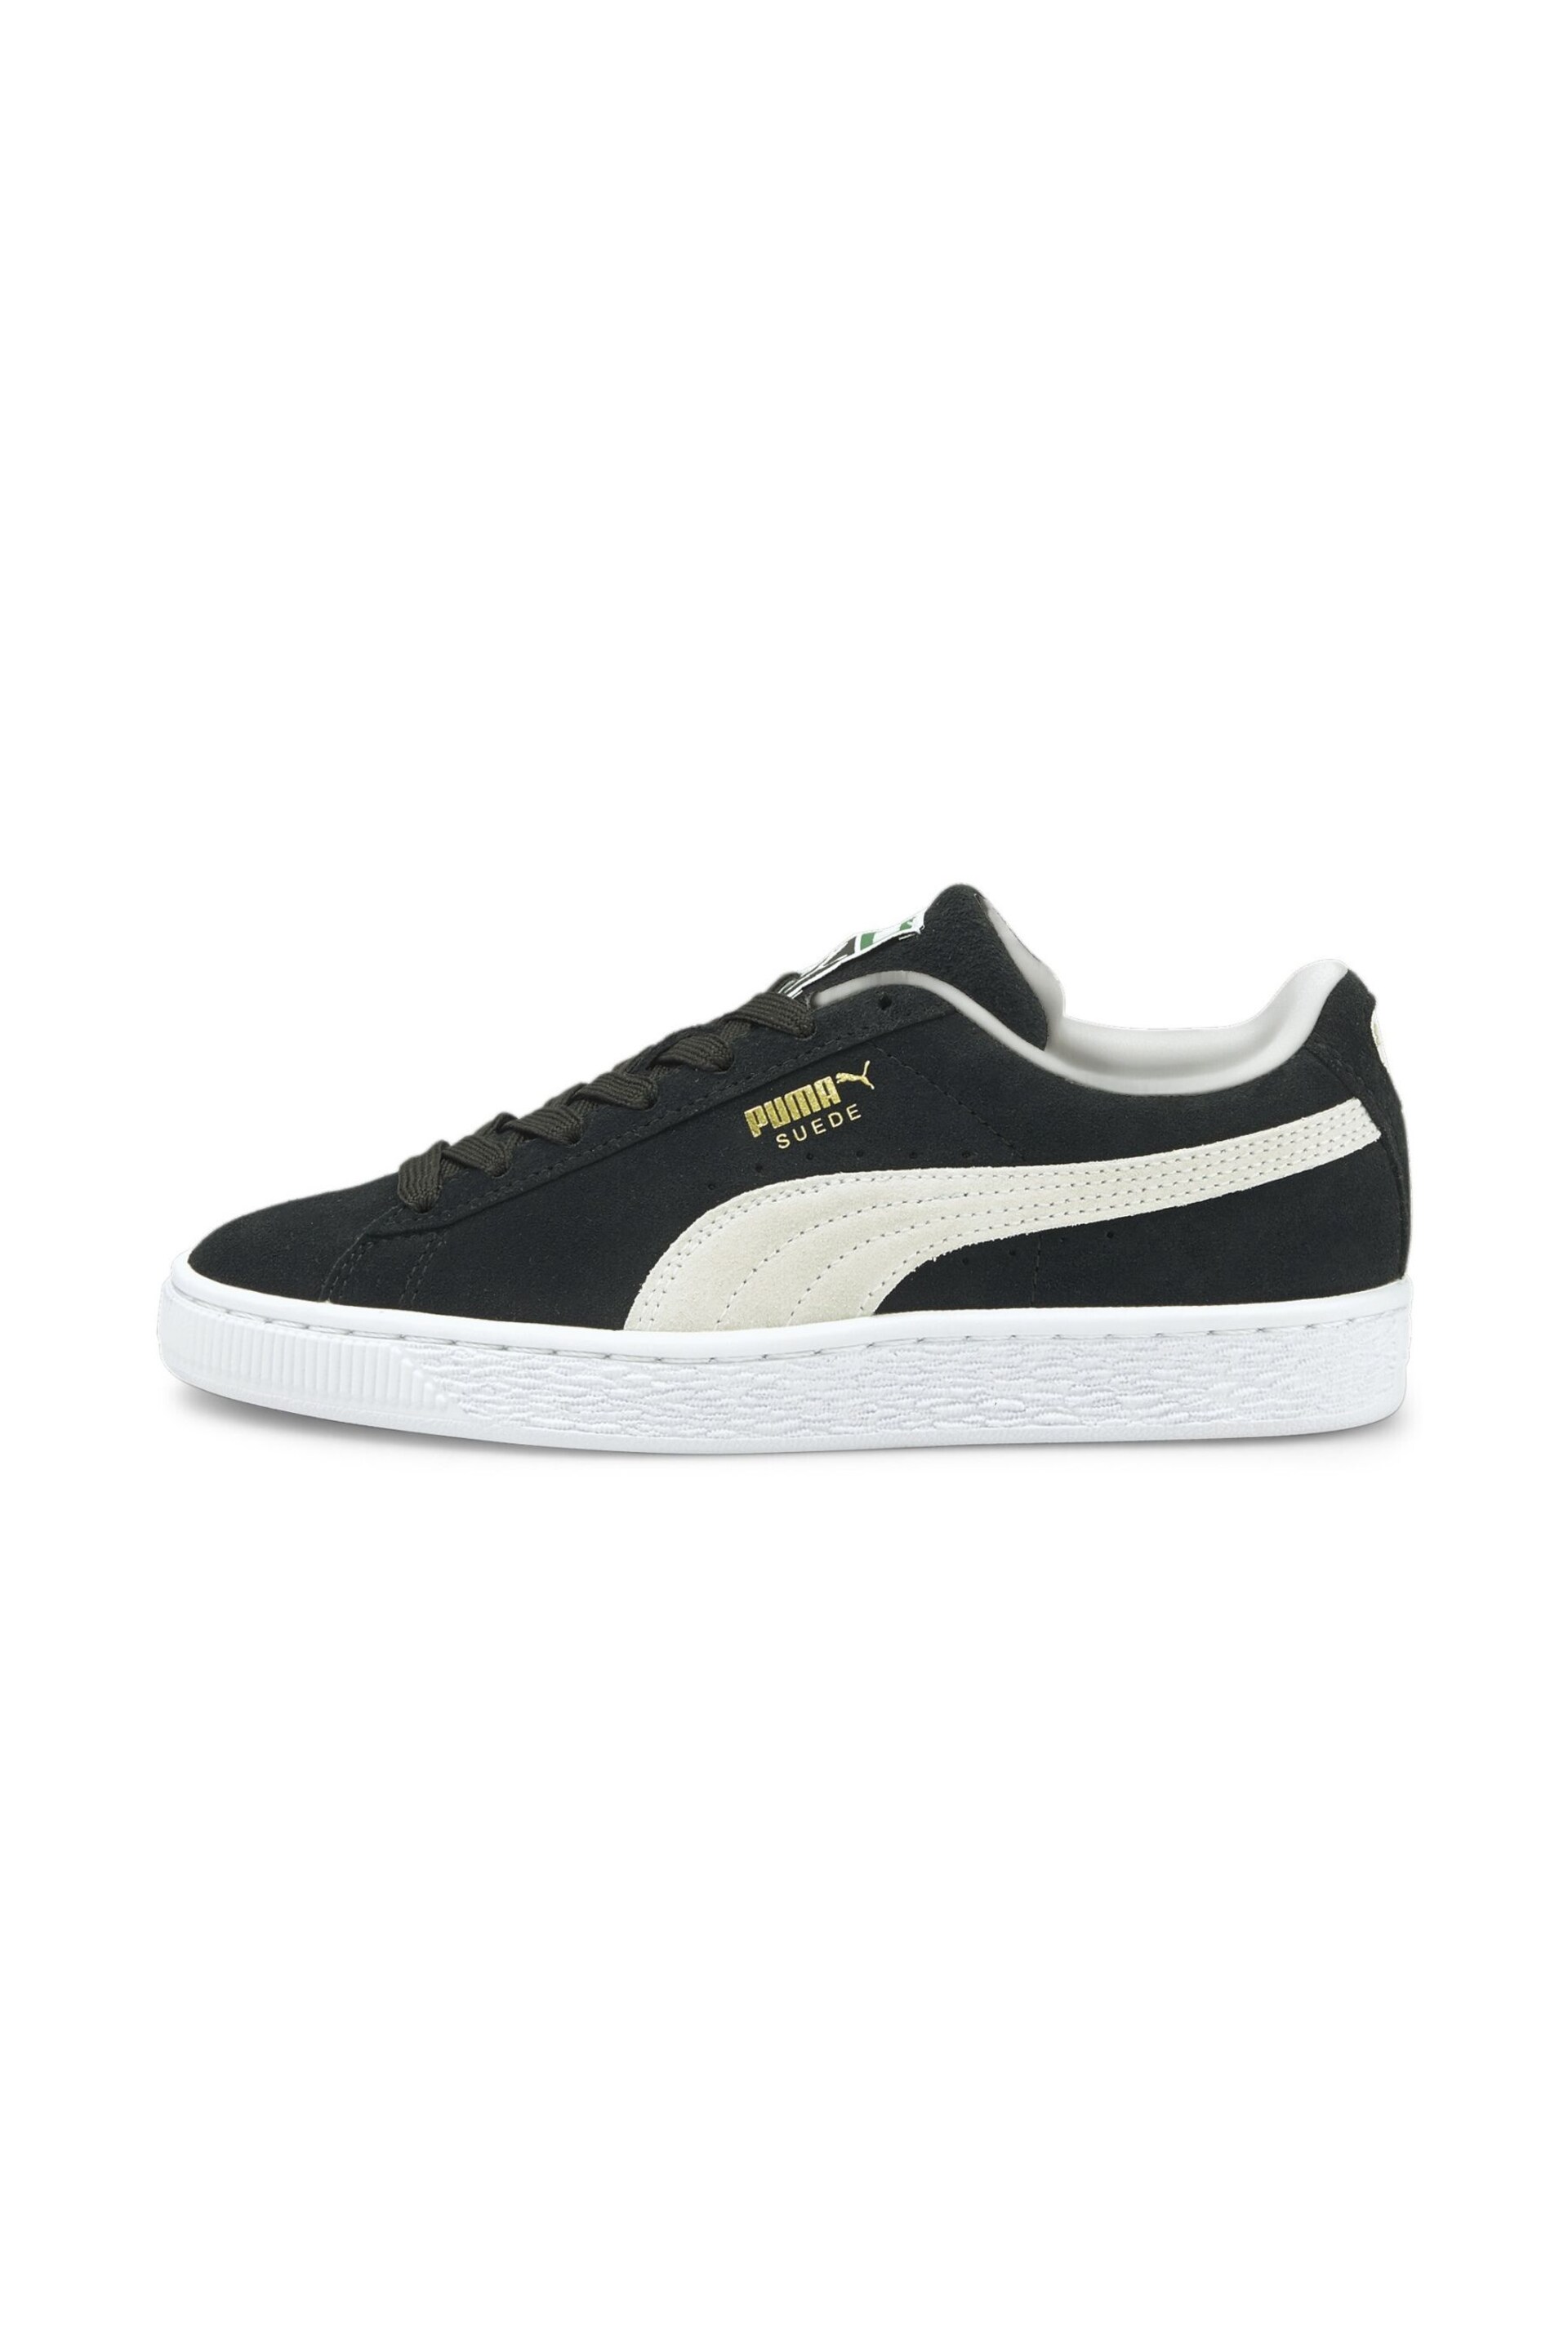 Puma Black Suede Classic XXI Youth Trainers - Image 2 of 7